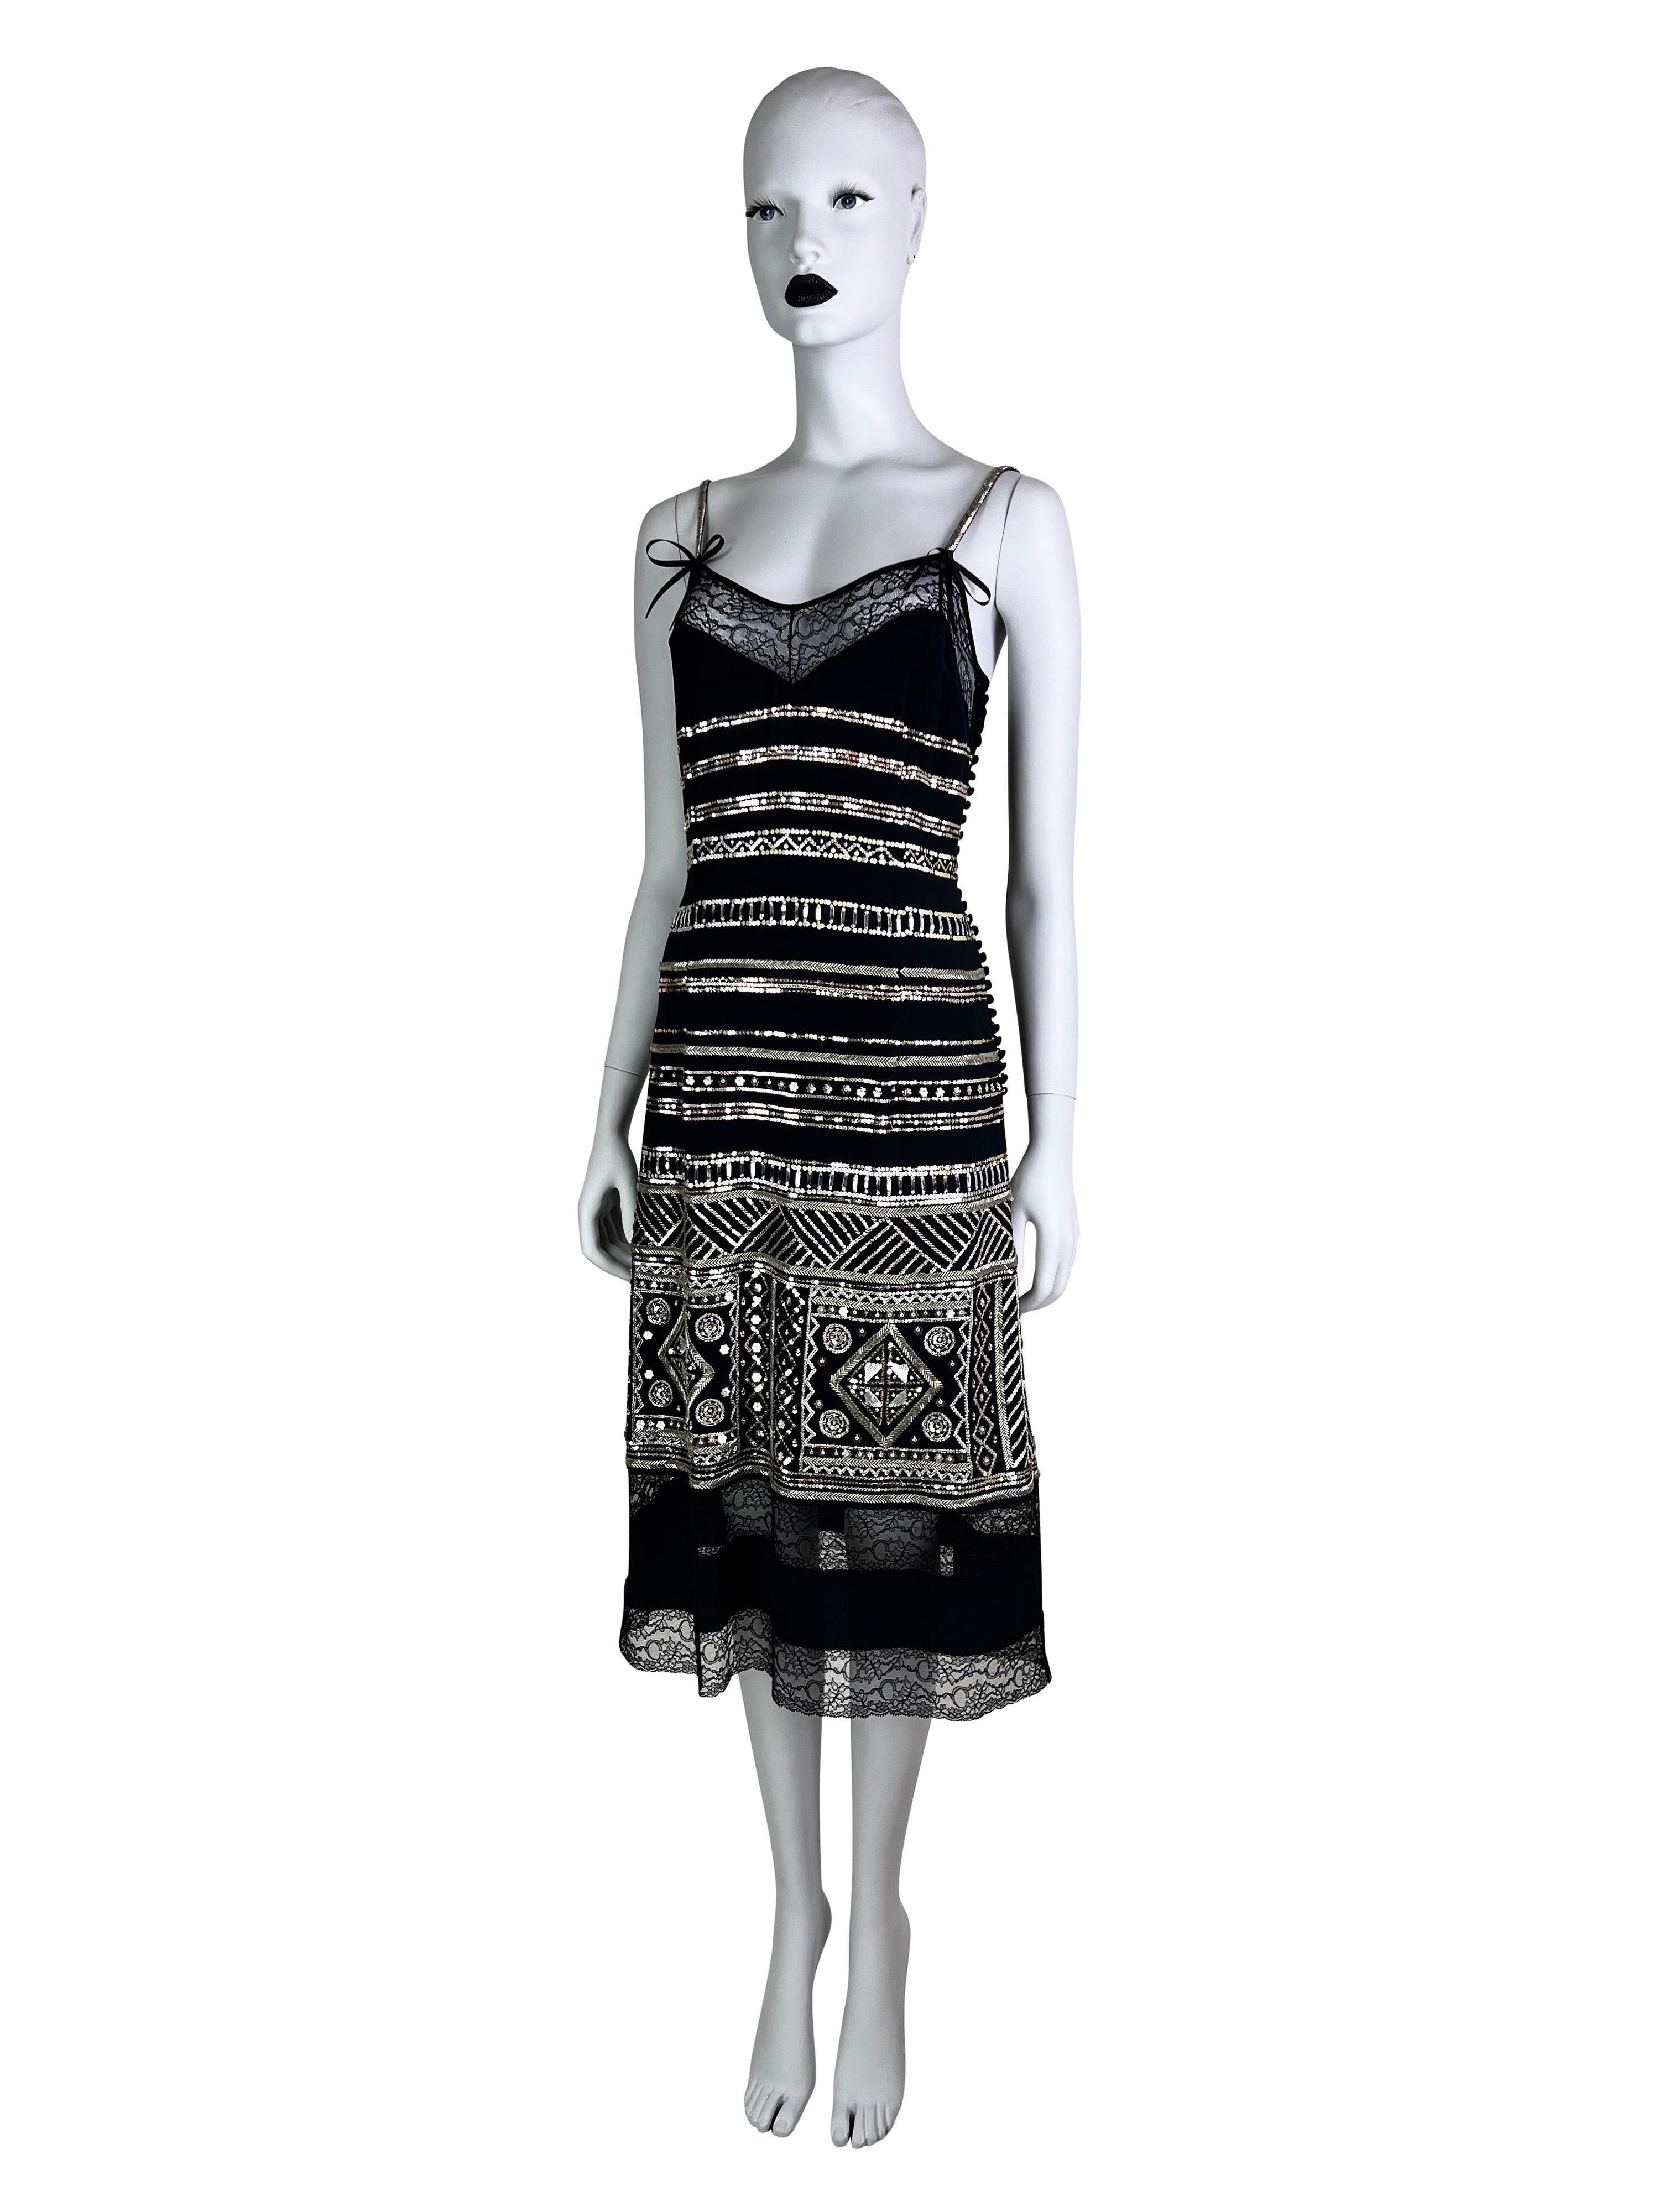 Dior by John Galliano Spring 2006 Embellished and Beaded Silk Cami Dress  For Sale 4